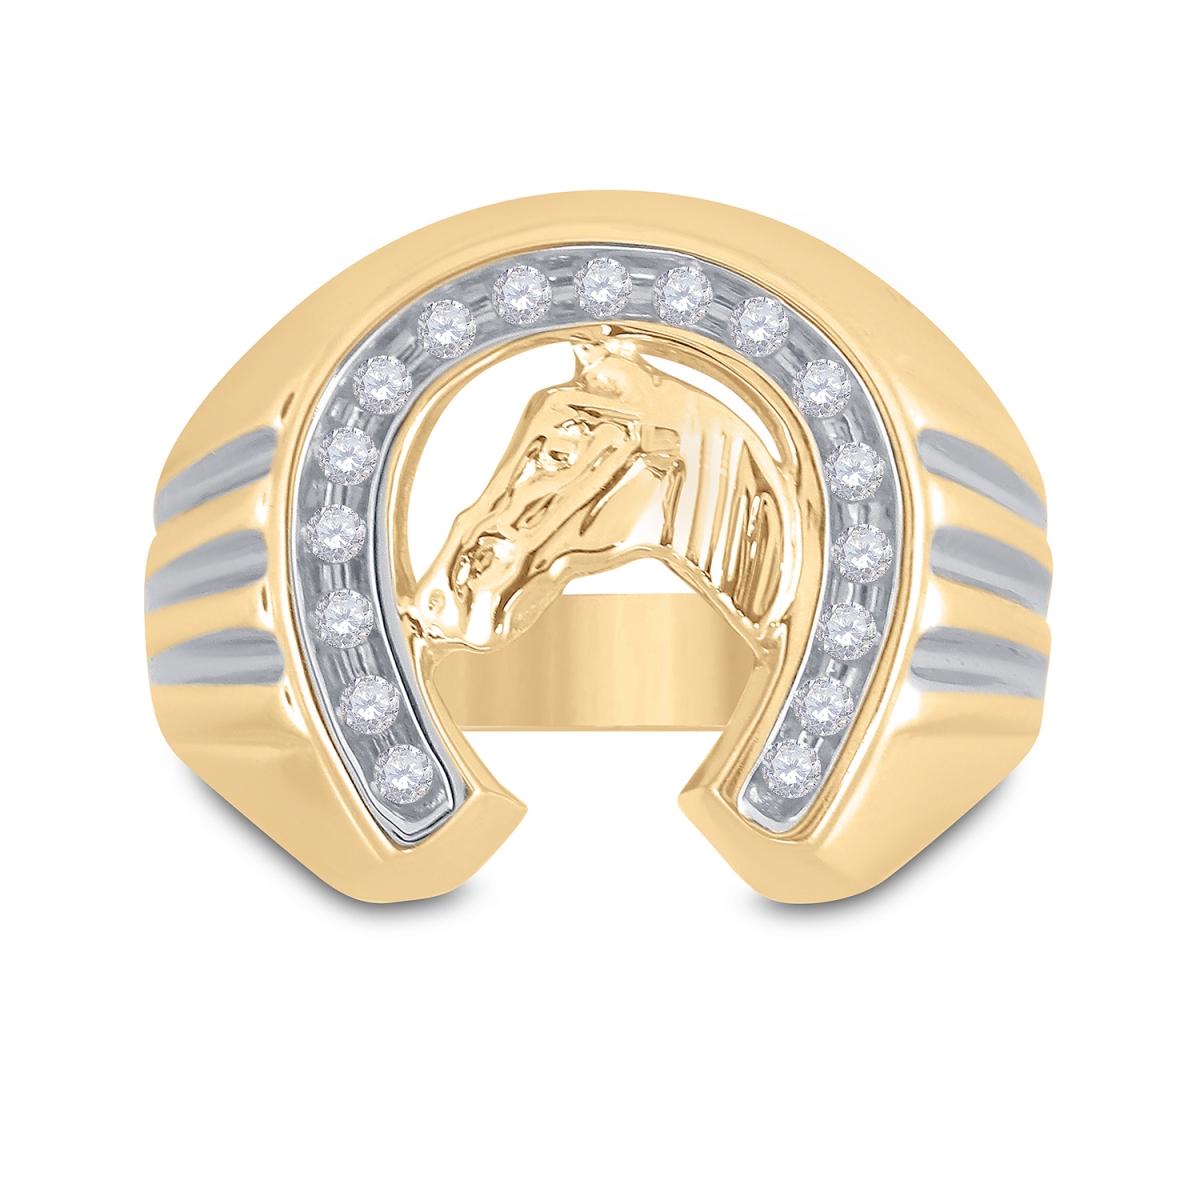 Picture of GND 21590 10KT Yellow Gold Mens Round Diamond Horseshoe Ring - 0.25 CTTW - Size 10